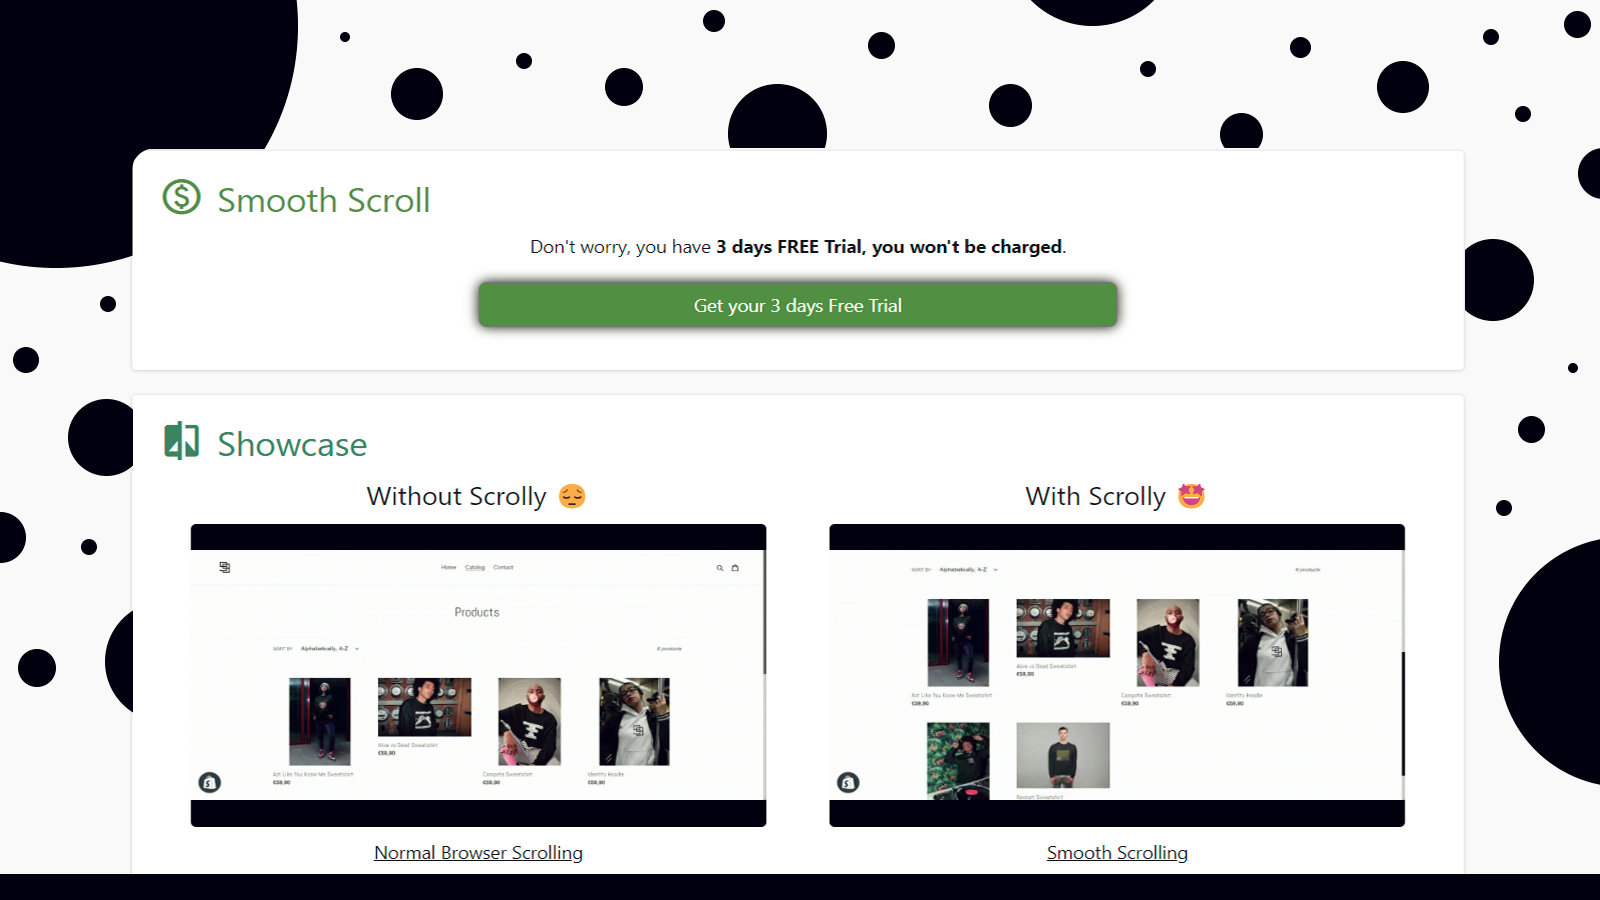 Smoothify shopify app that adds smooth scroll to your storÐµ